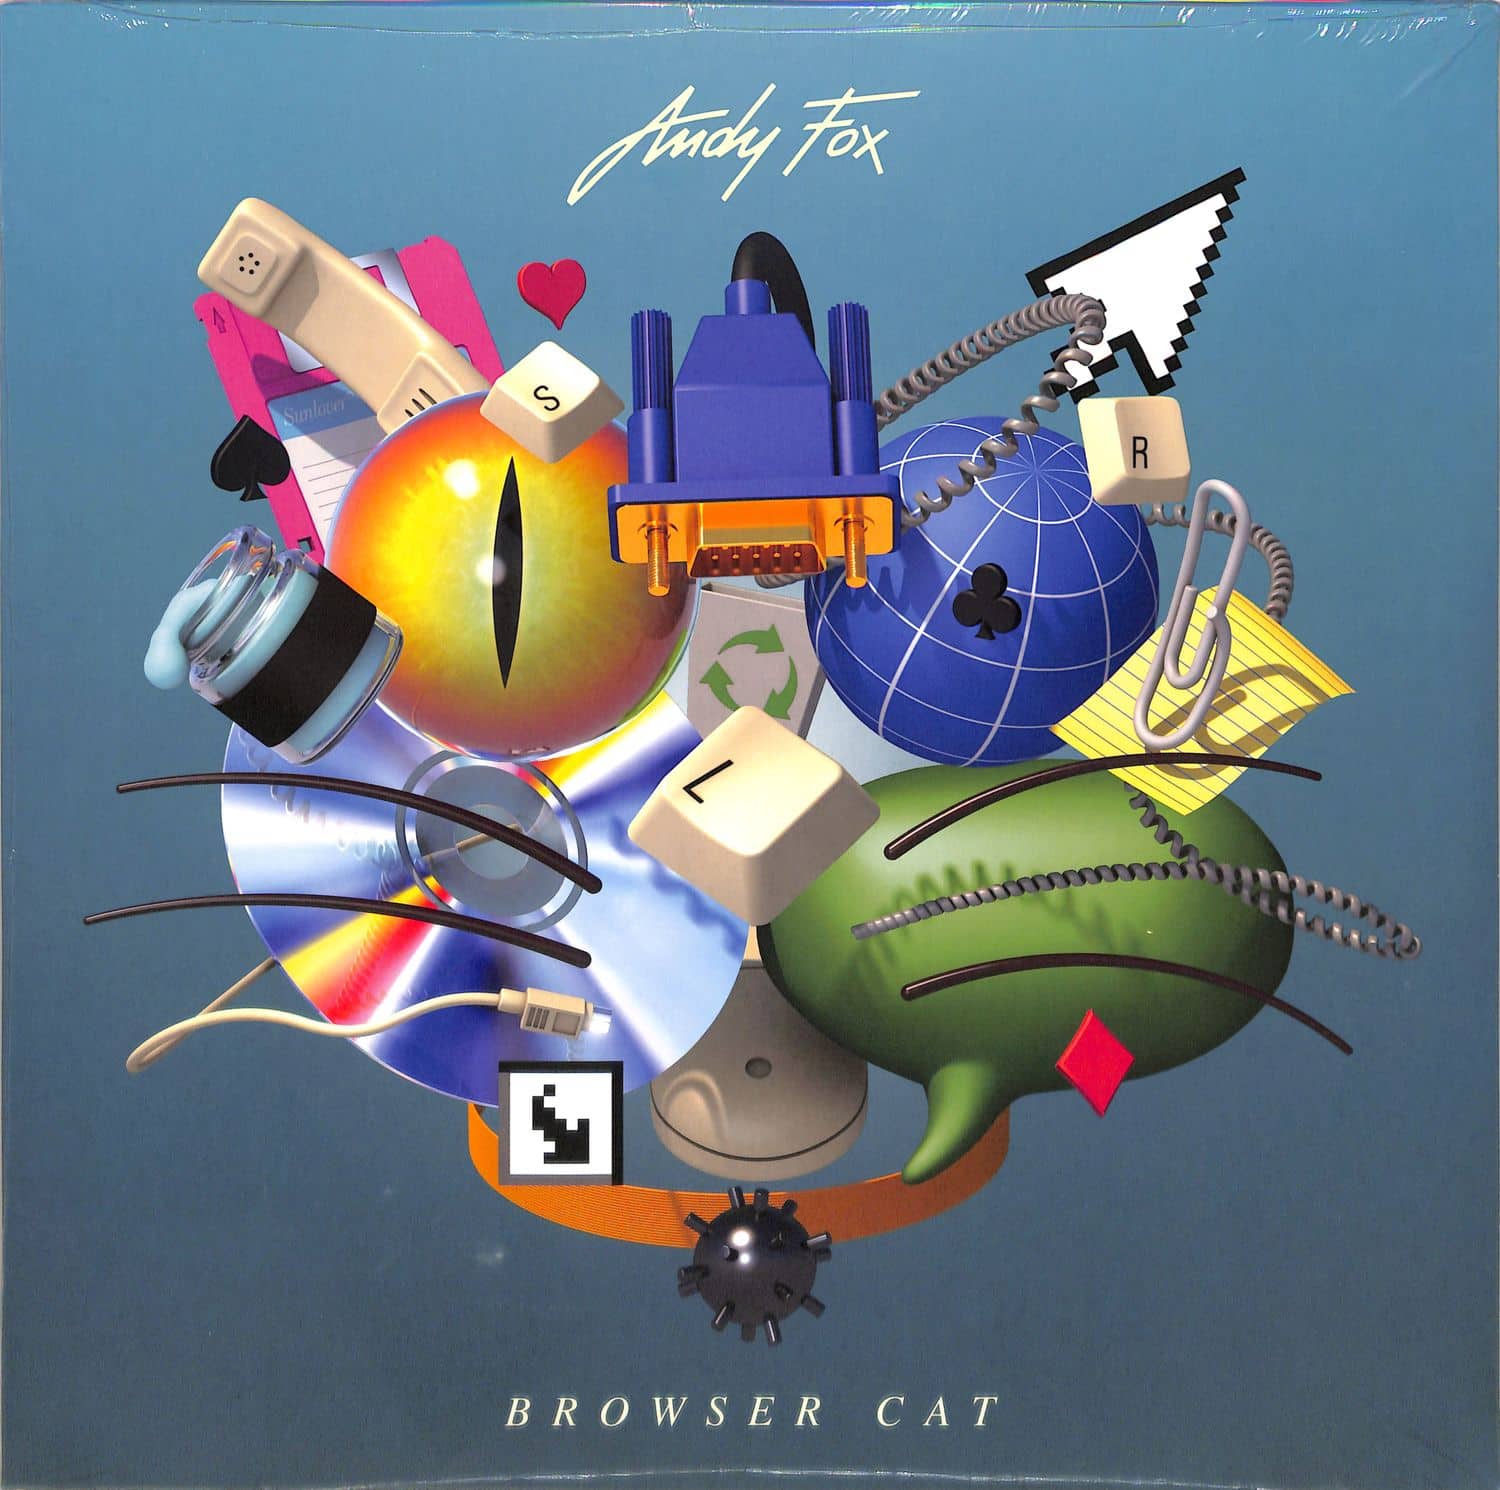 Andy Fox - BROWSER CAT EP